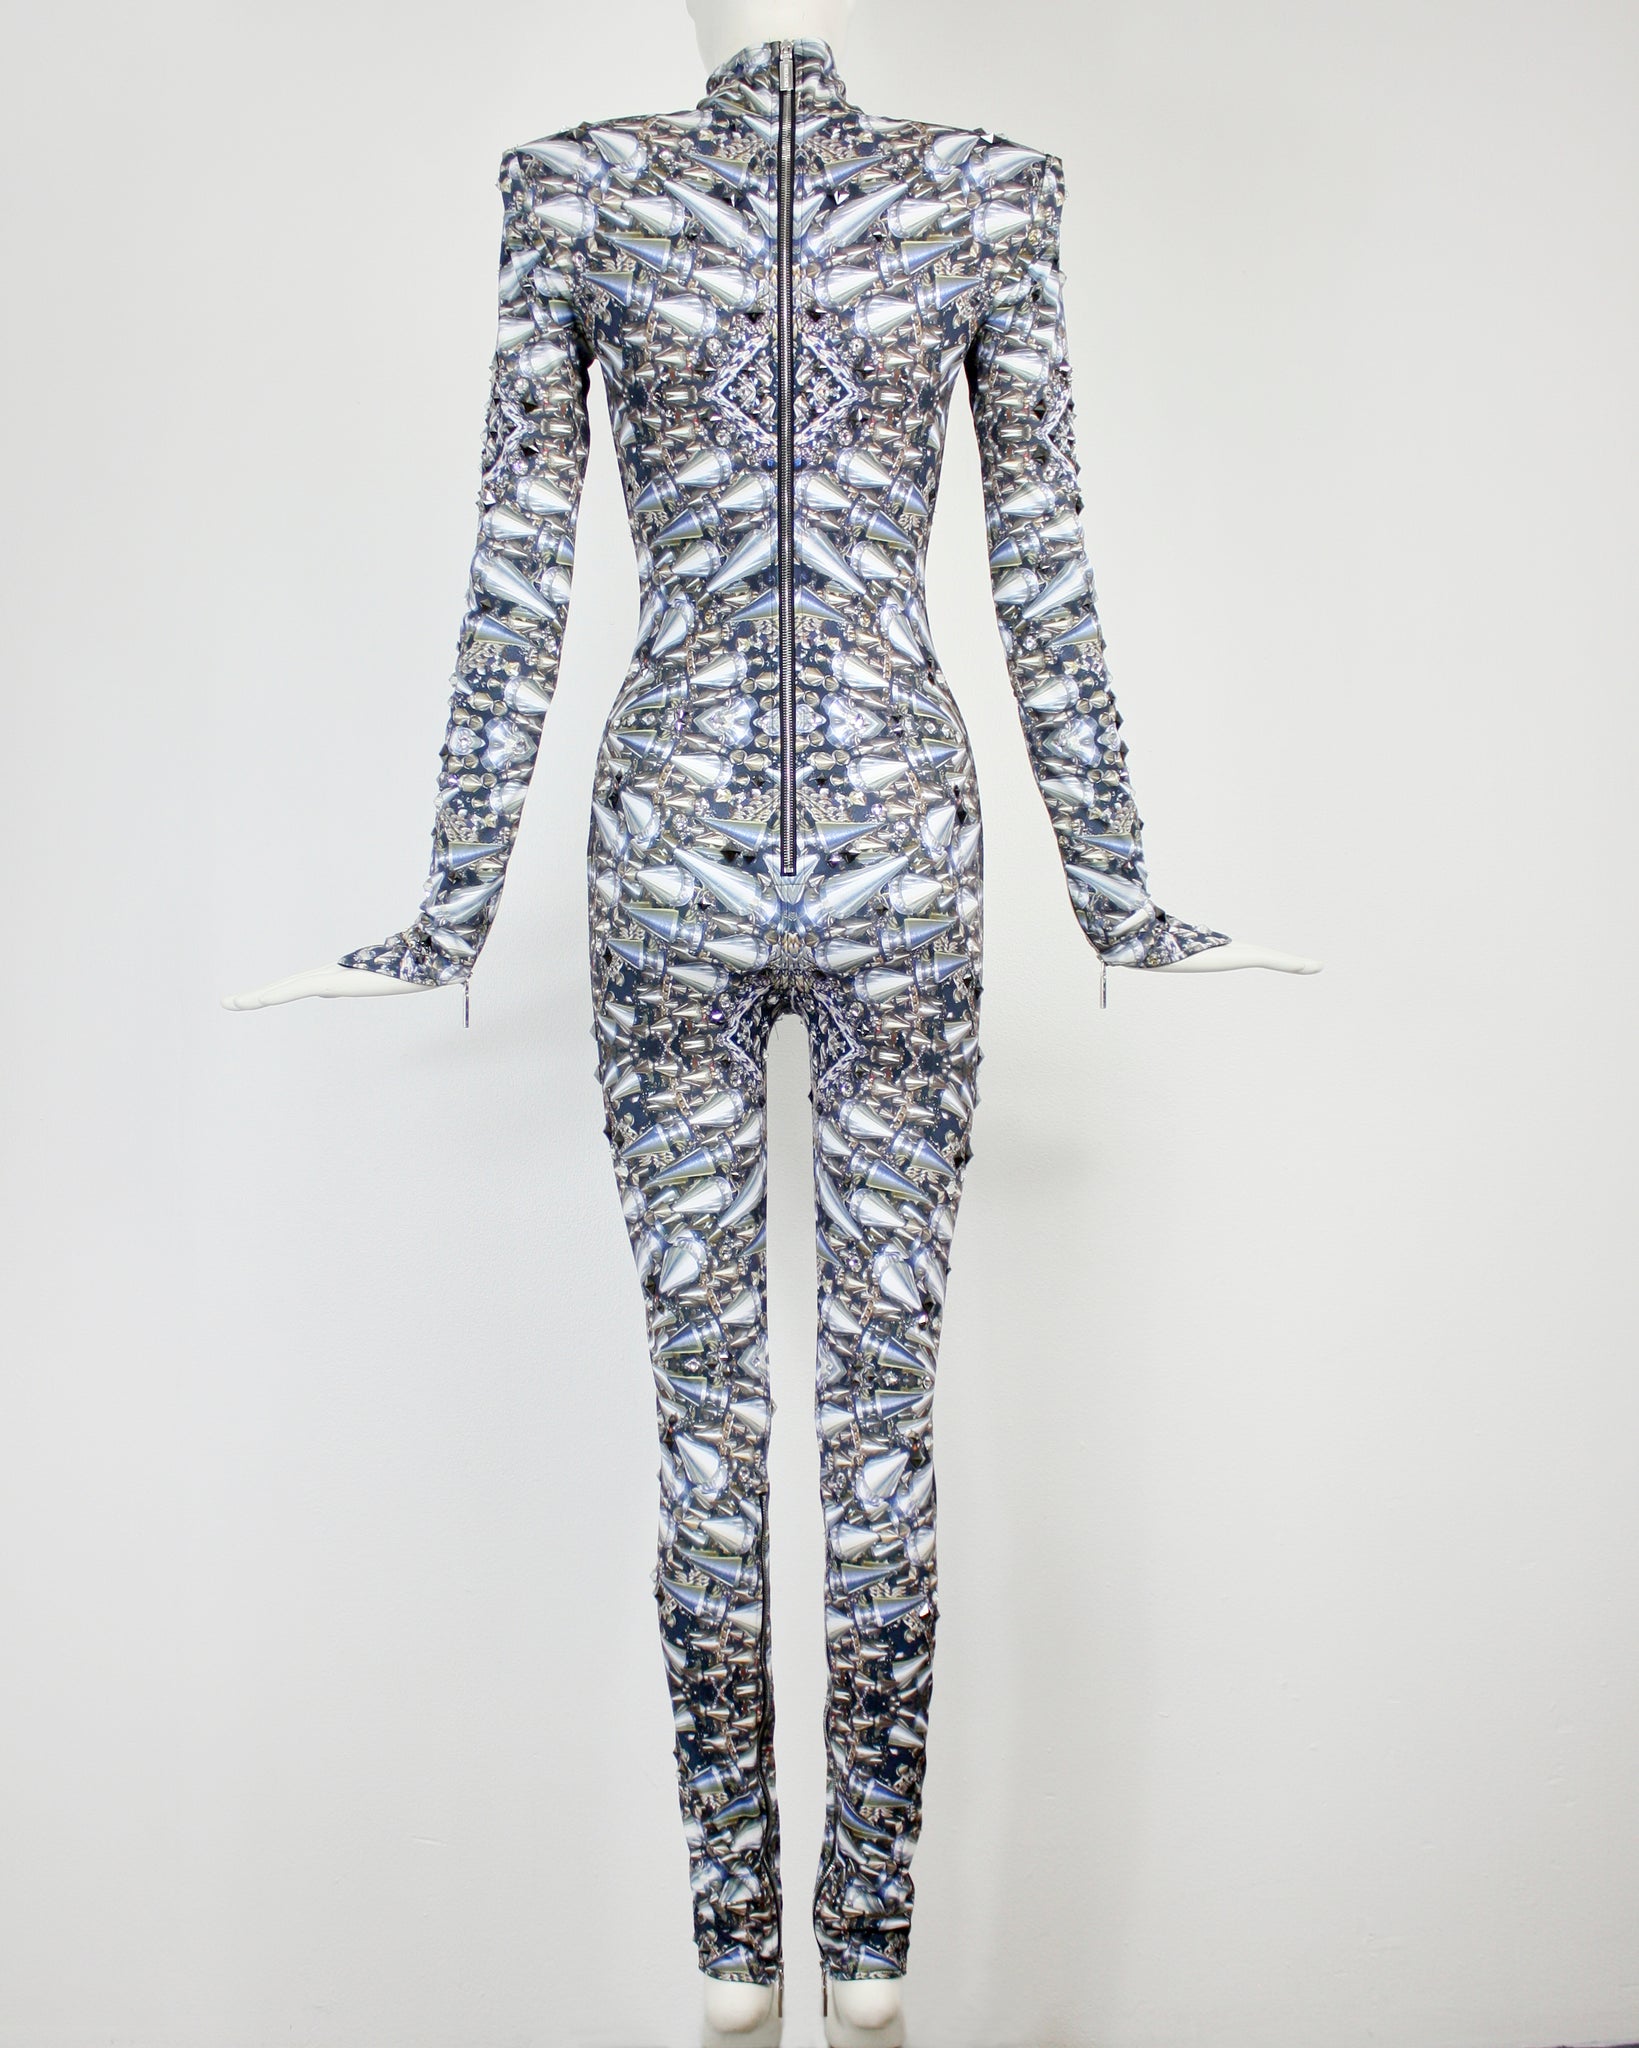 SPIKE PRINT CATSUIT WITH PRECIOSA CRYSTAL DETAIL